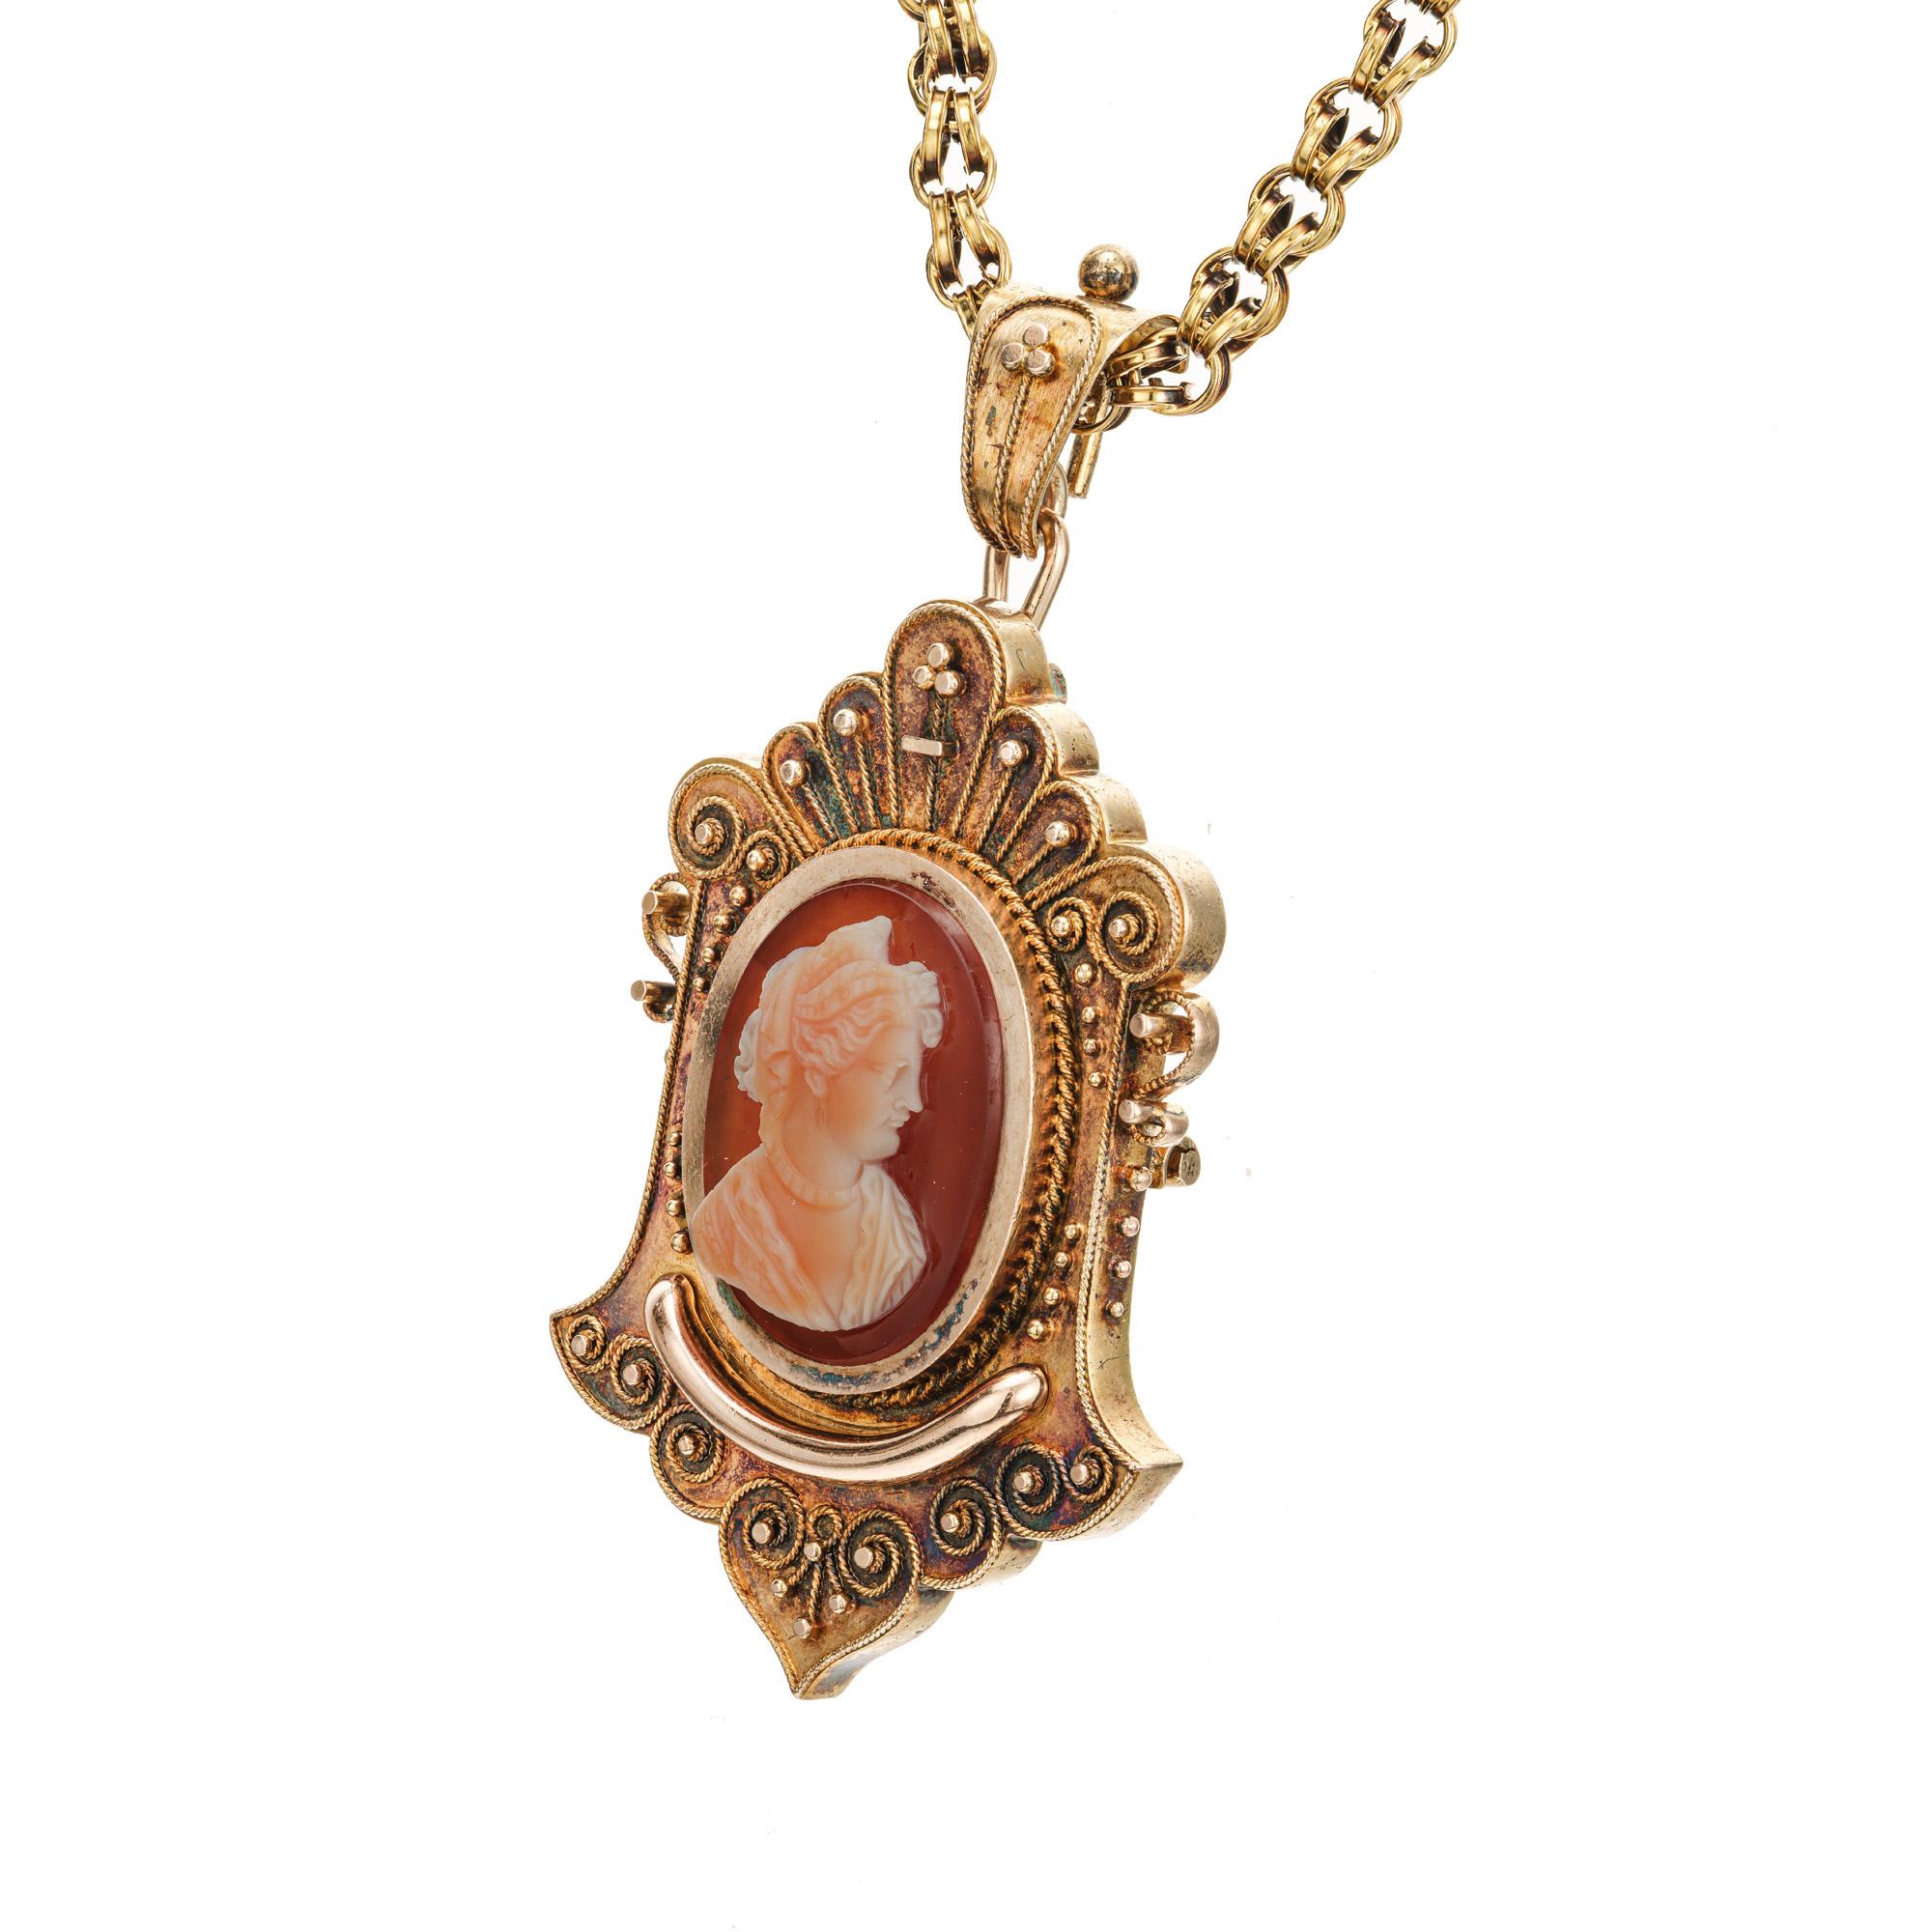 Oval Cut Victorian 1845 Carnelian Hardstone Yellow Gold Cameo Brooch Pendant Necklace For Sale